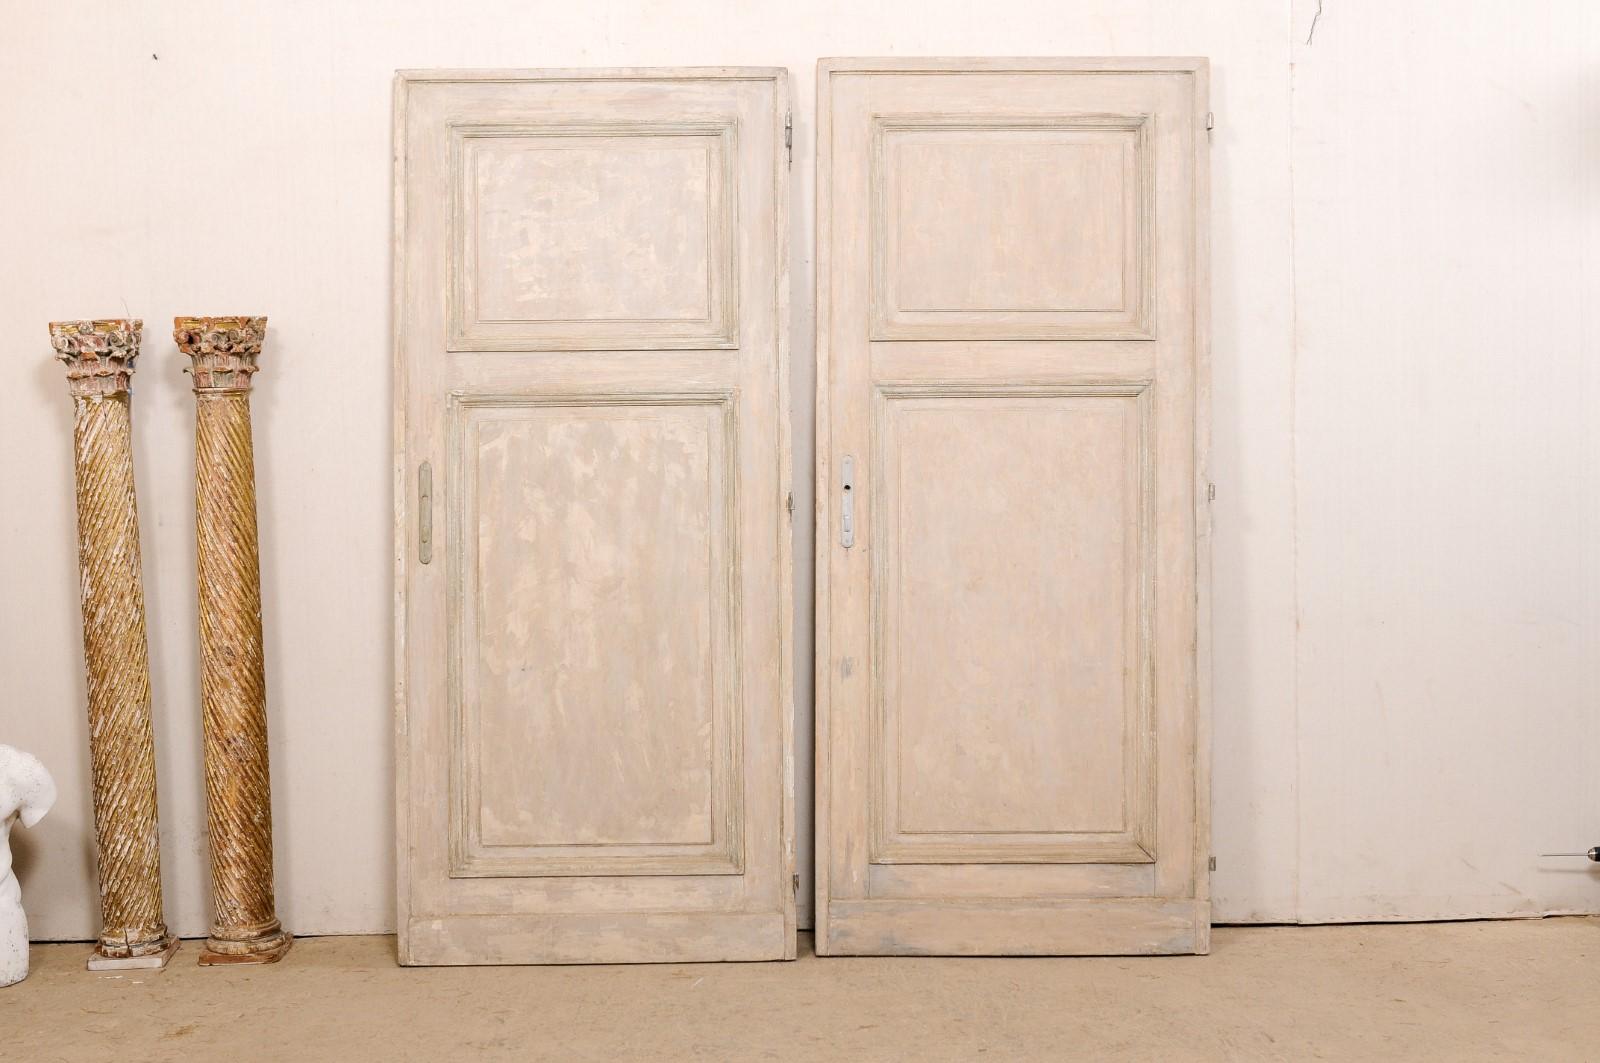 A French set of two doors, both singles, from the 19th century. These antique doors from France, though not meant to match up together (as in a pair of French-style doors) but are two near-identical single doors. Each door is comprised of two